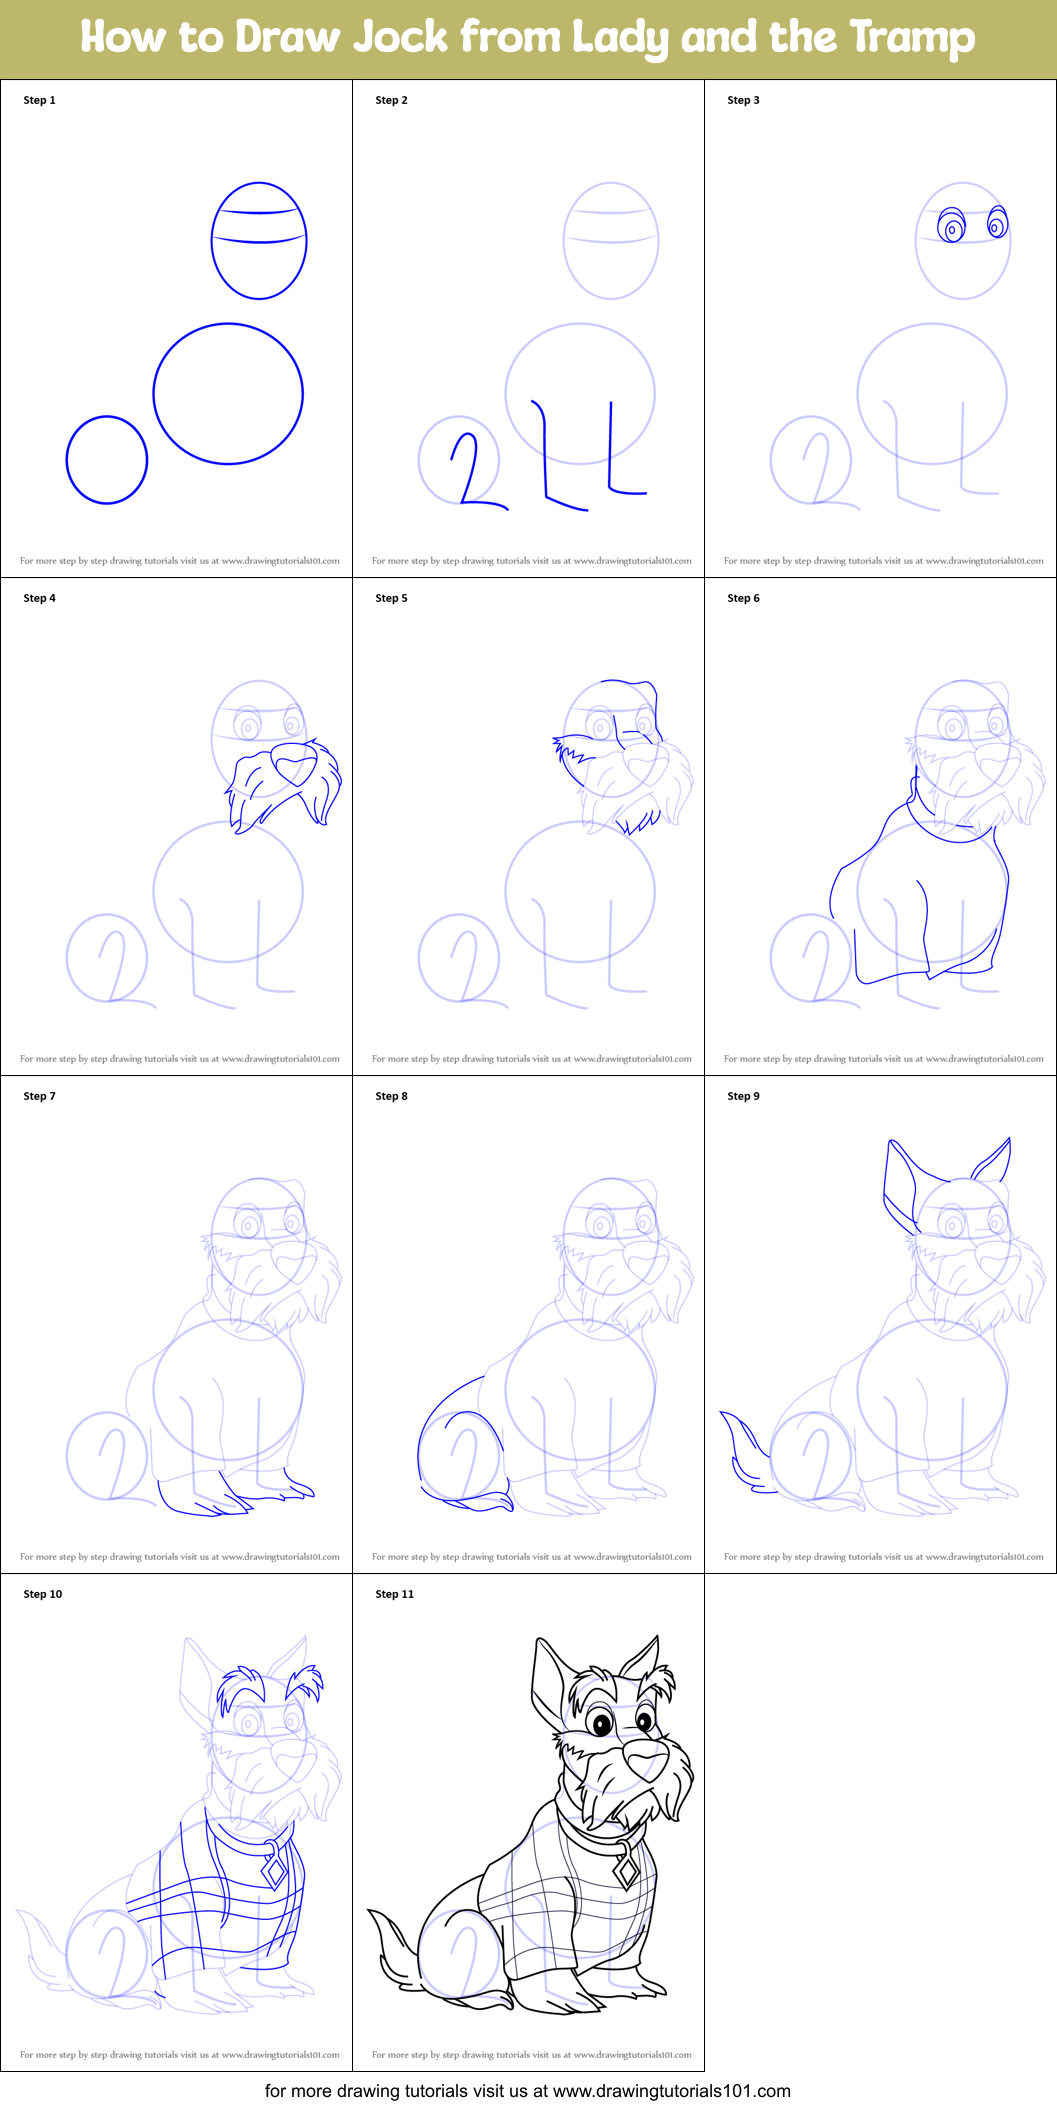 Download How to Draw Jock from Lady and the Tramp printable step by step drawing sheet ...